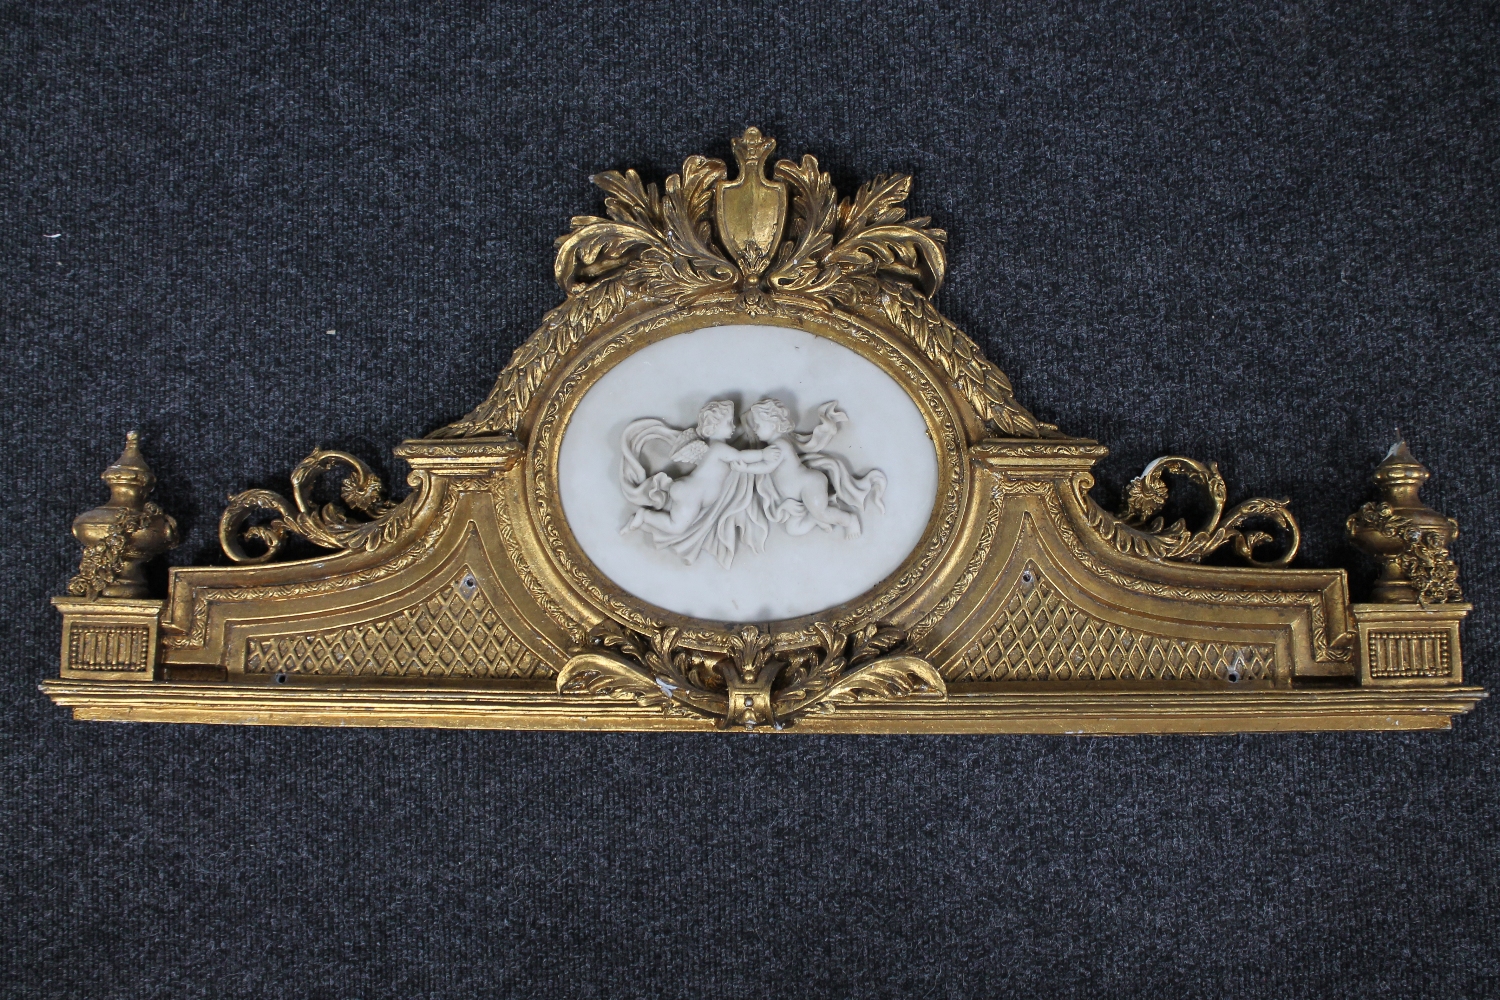 A ornate gilt composite panel depicting two cherubs